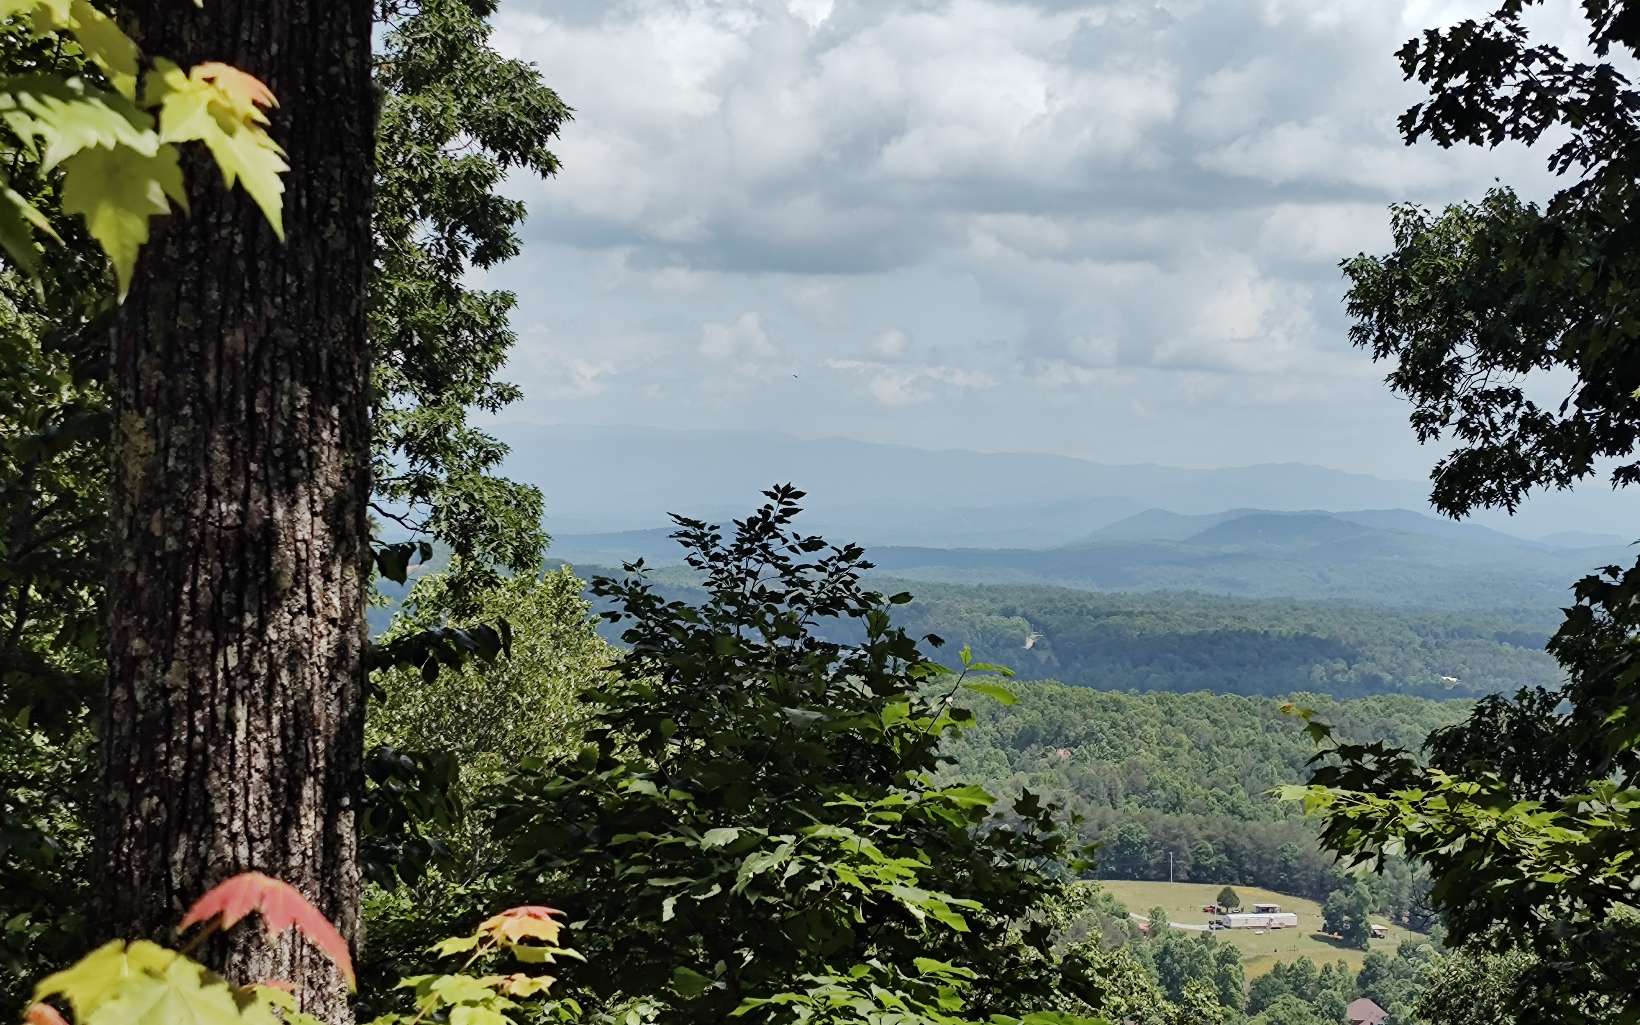 Views forever! This building lot has incredible layered mountain views. Great neighborhood with beautiful homes and a gated entrance. Convenient to both Blairsville and Blue Ridge. Lake Nottely is also close by and can be seen in the distance.